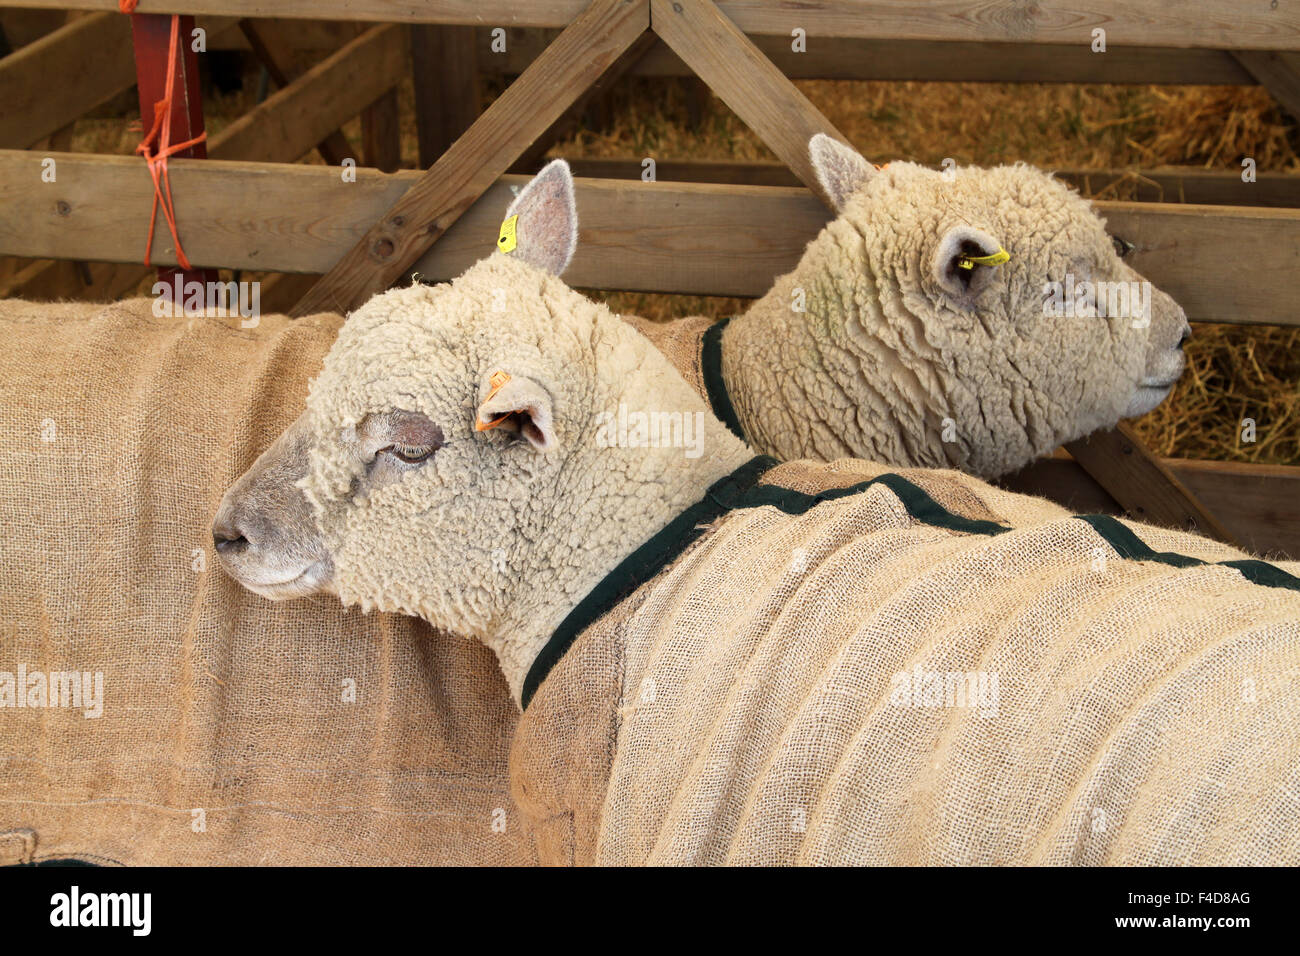 Two Southdown sheep in pen at Agricultural Show Stock Photo